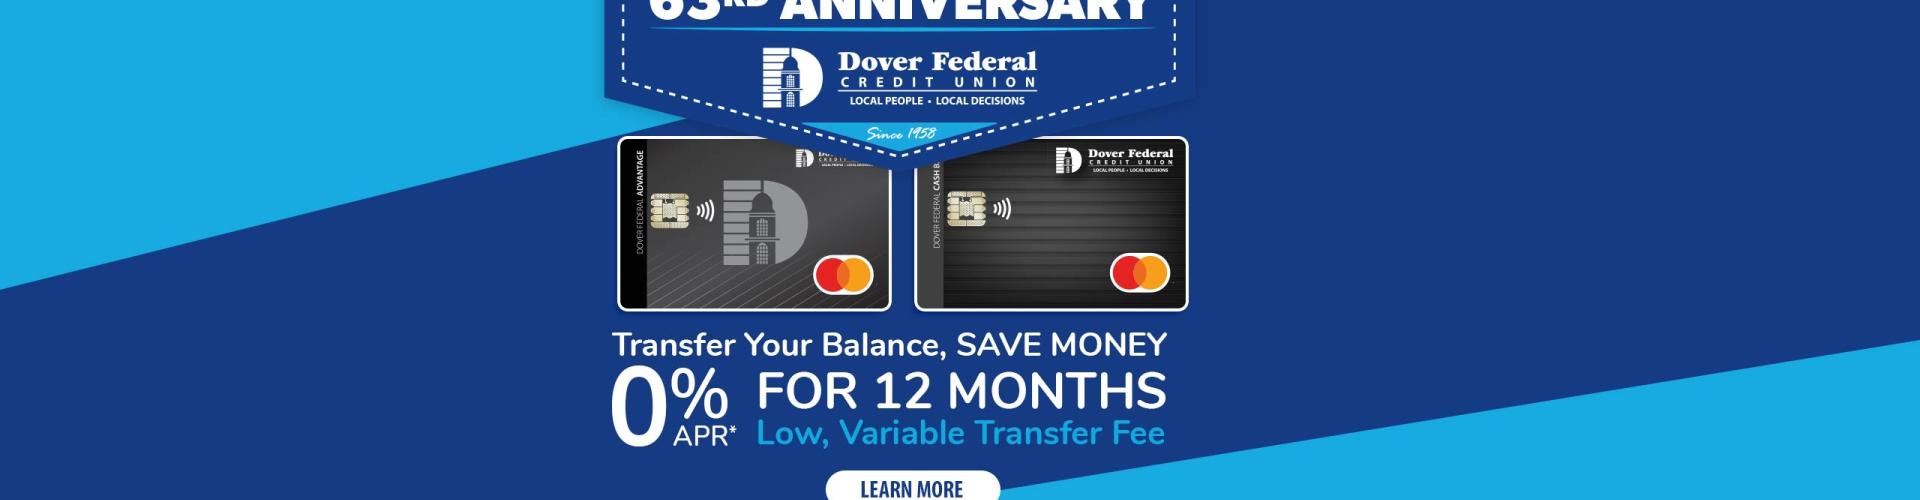 63 Anniversary Promo: Transfer Your Balance, Save Money. 0% APR for 12 months. Low, variable transfer fee applies.